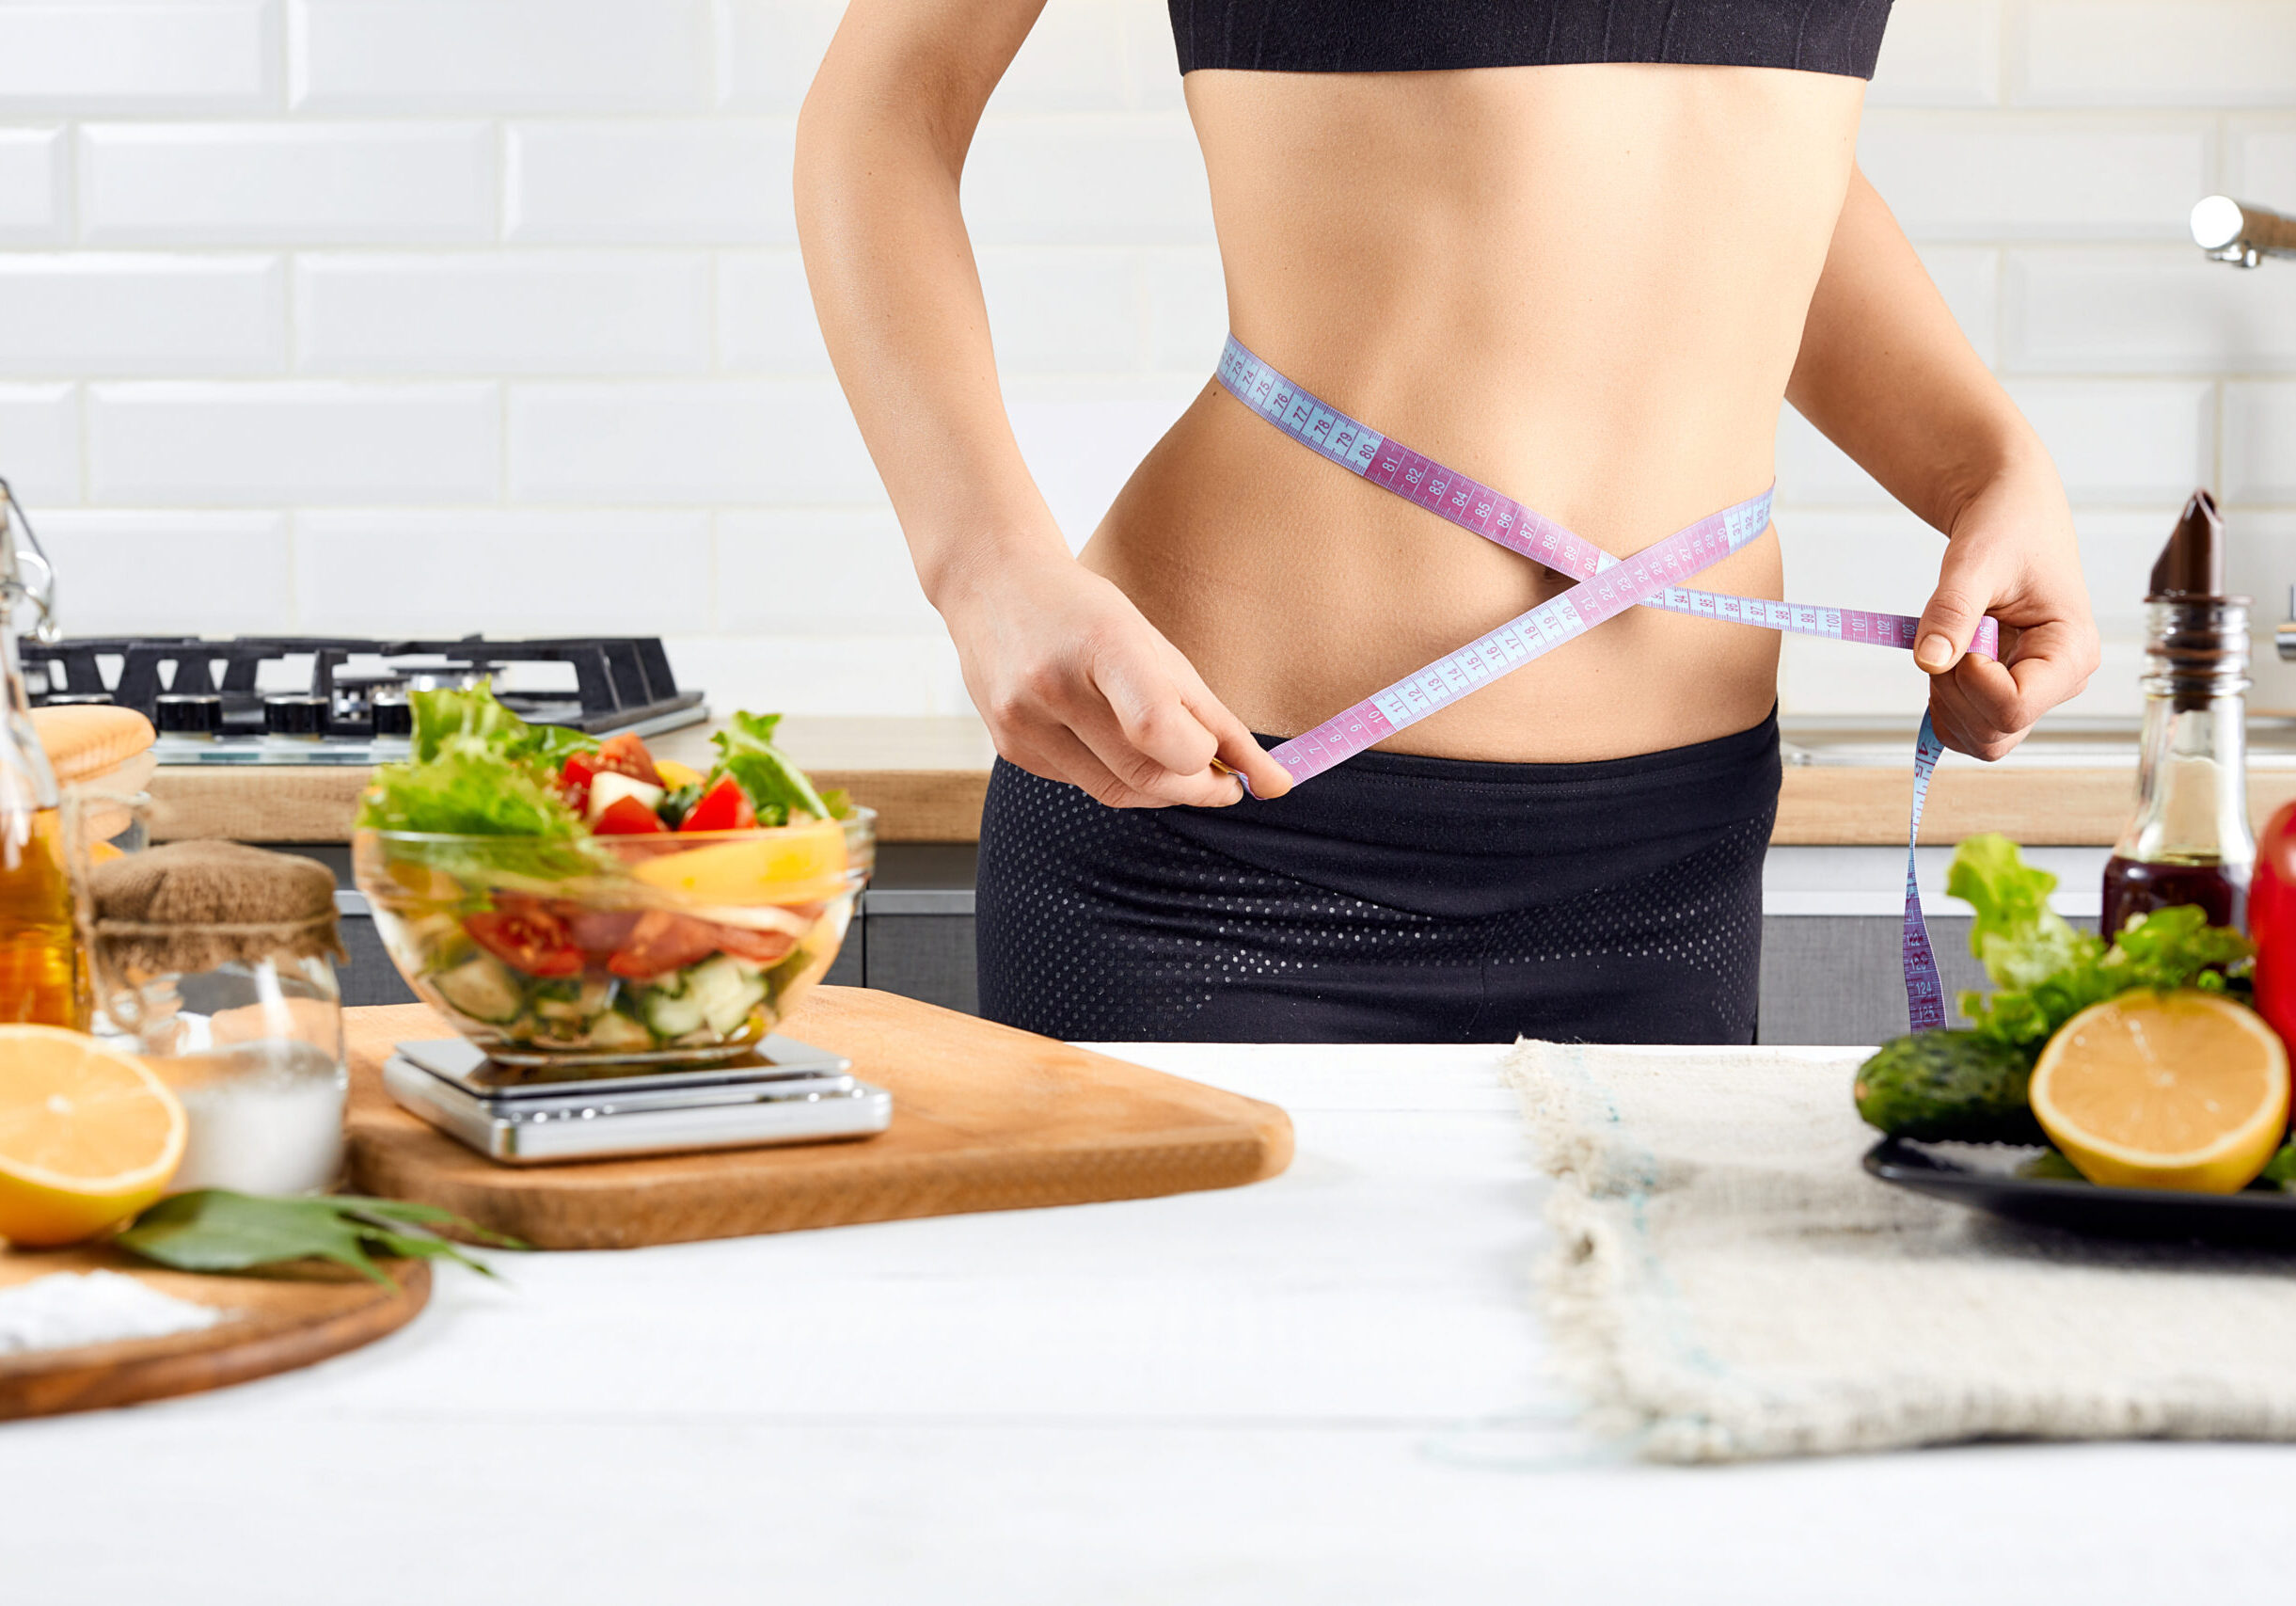 Diet, healthy eating, food and weigh loss concept. Young woman measuring waist near tomatoes, peppers and salad on the kitchen interior.